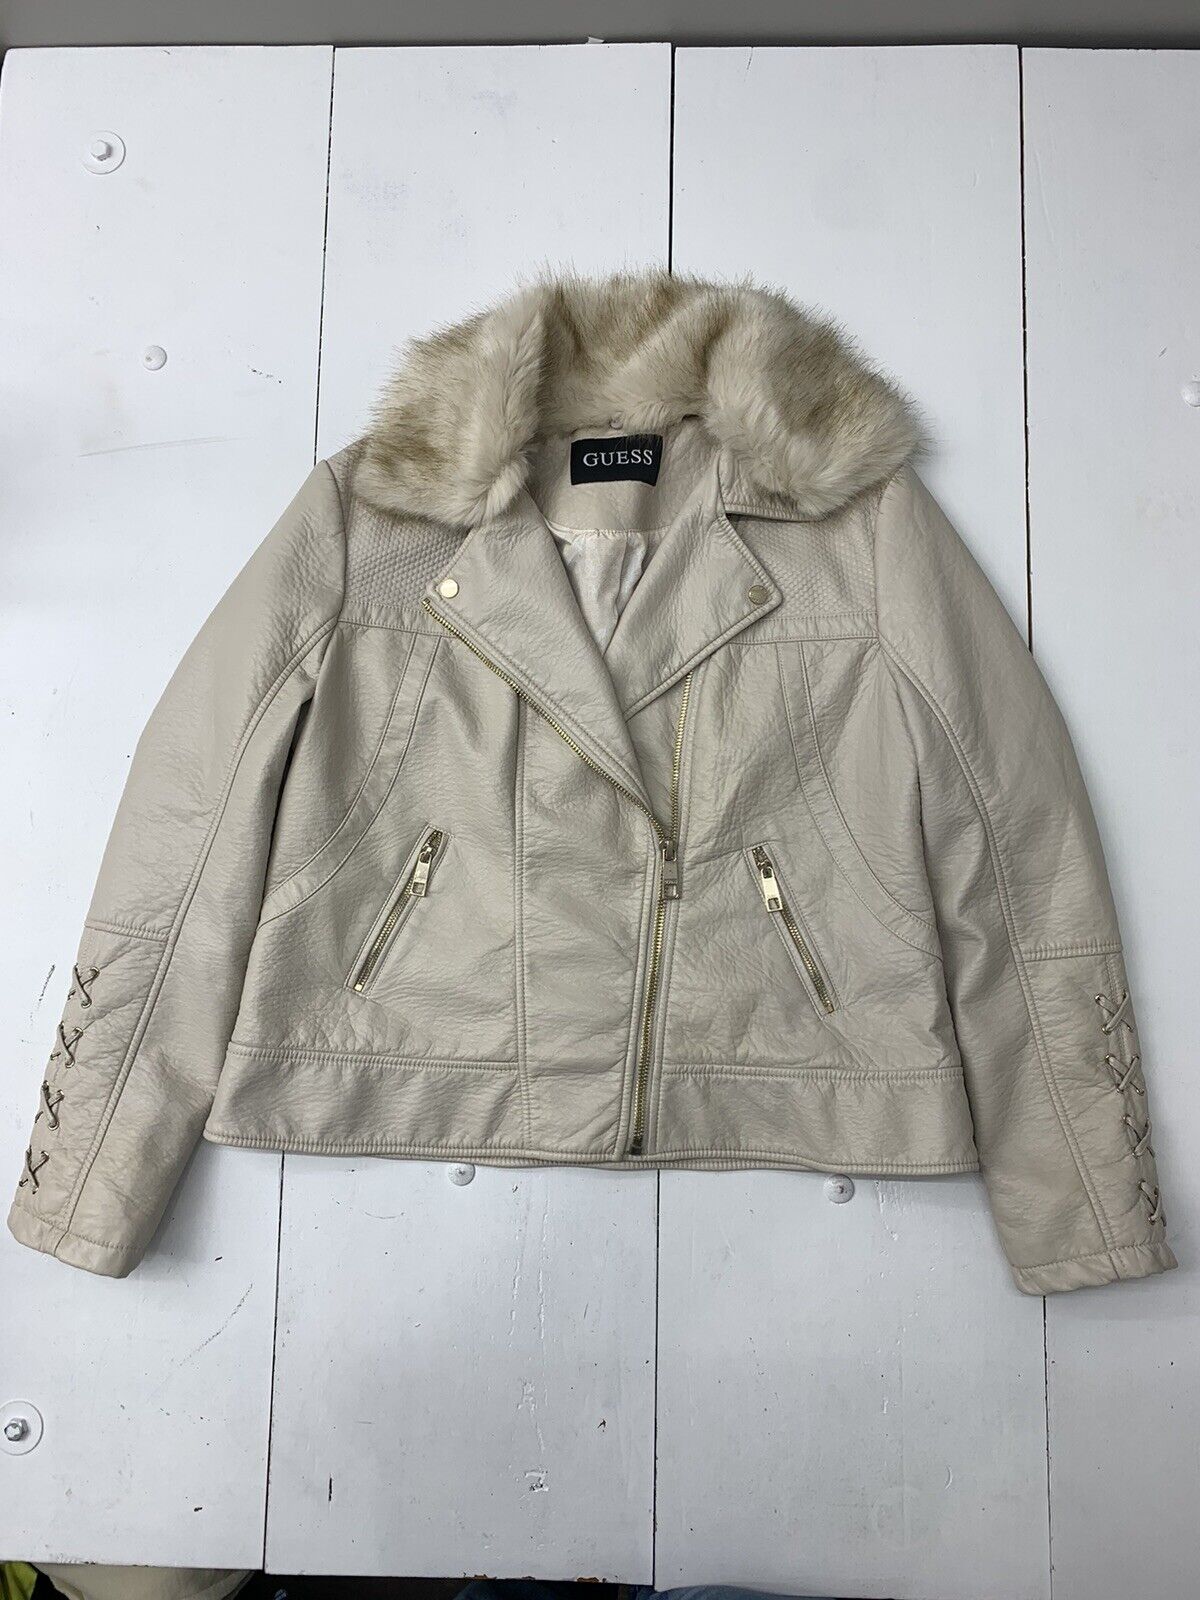 Guess Womens Ivory Faux Leather Fur Neck Coat Size Large